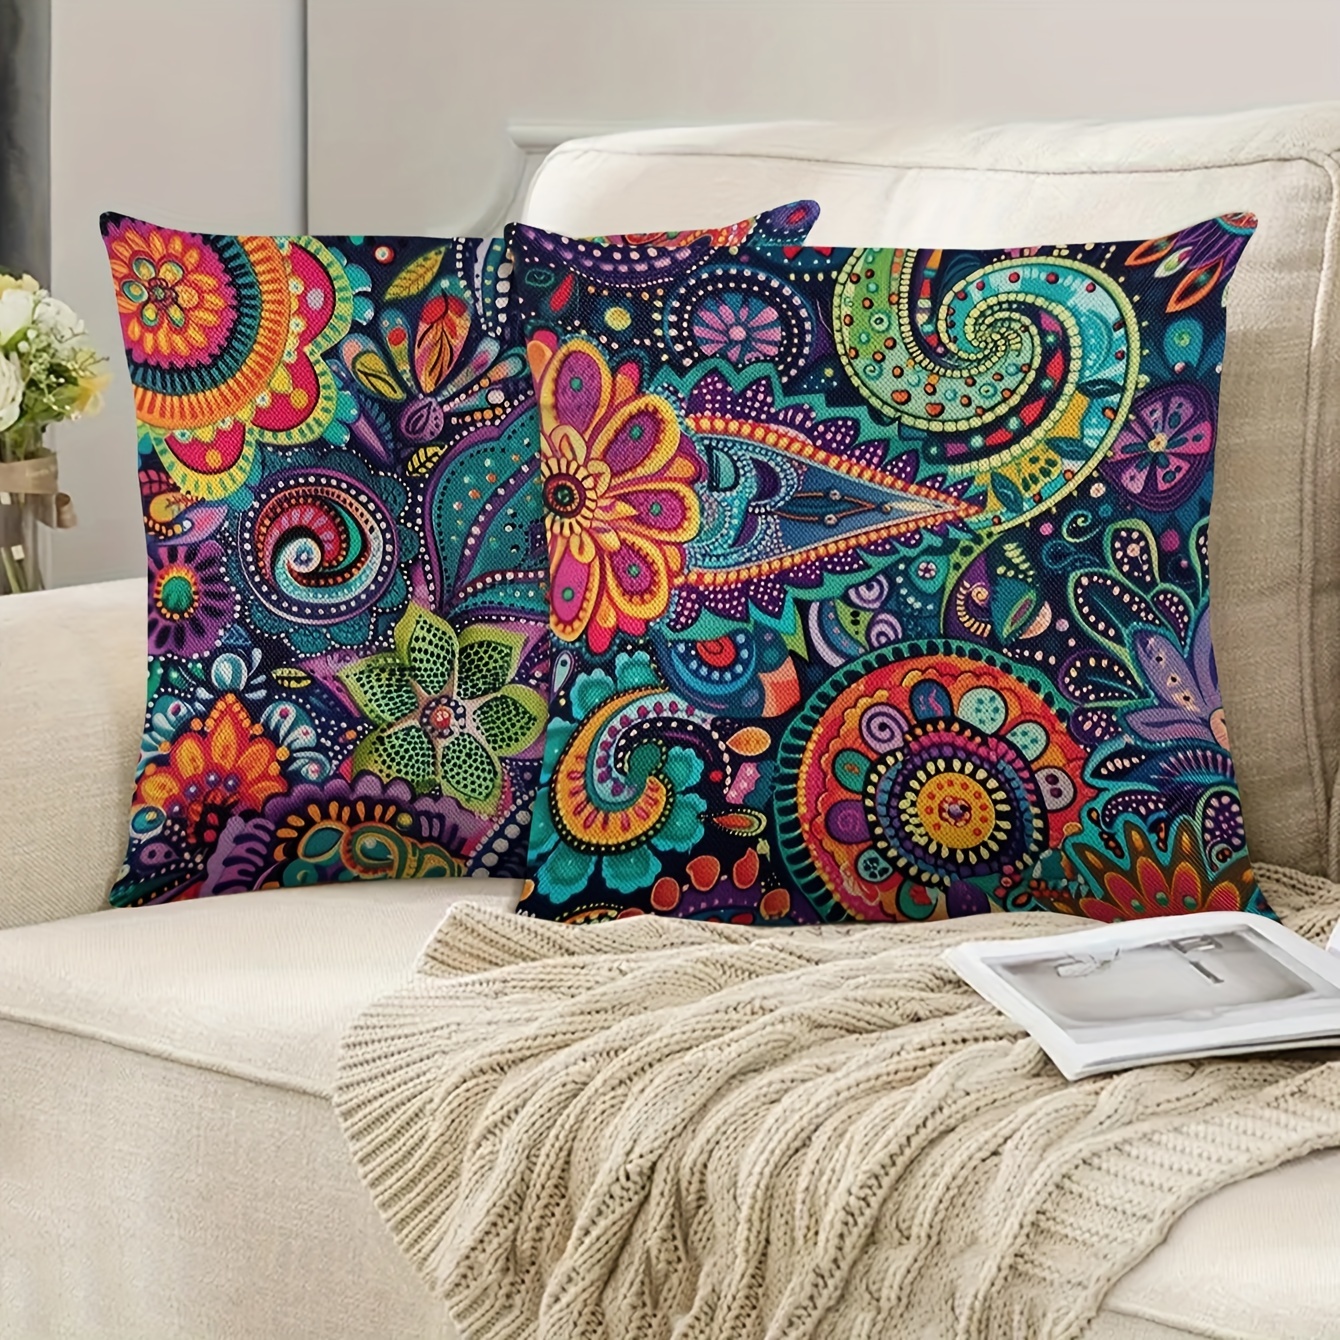 

2pcs Paisley Print Linen Pillowcases 18x18 Inches - Zippered, Machine Washable Covers For Sofa, Bed, And Home Decor (inserts Not Included) Queen Size Comforter Sets With Sheets Linen Pillow Covers